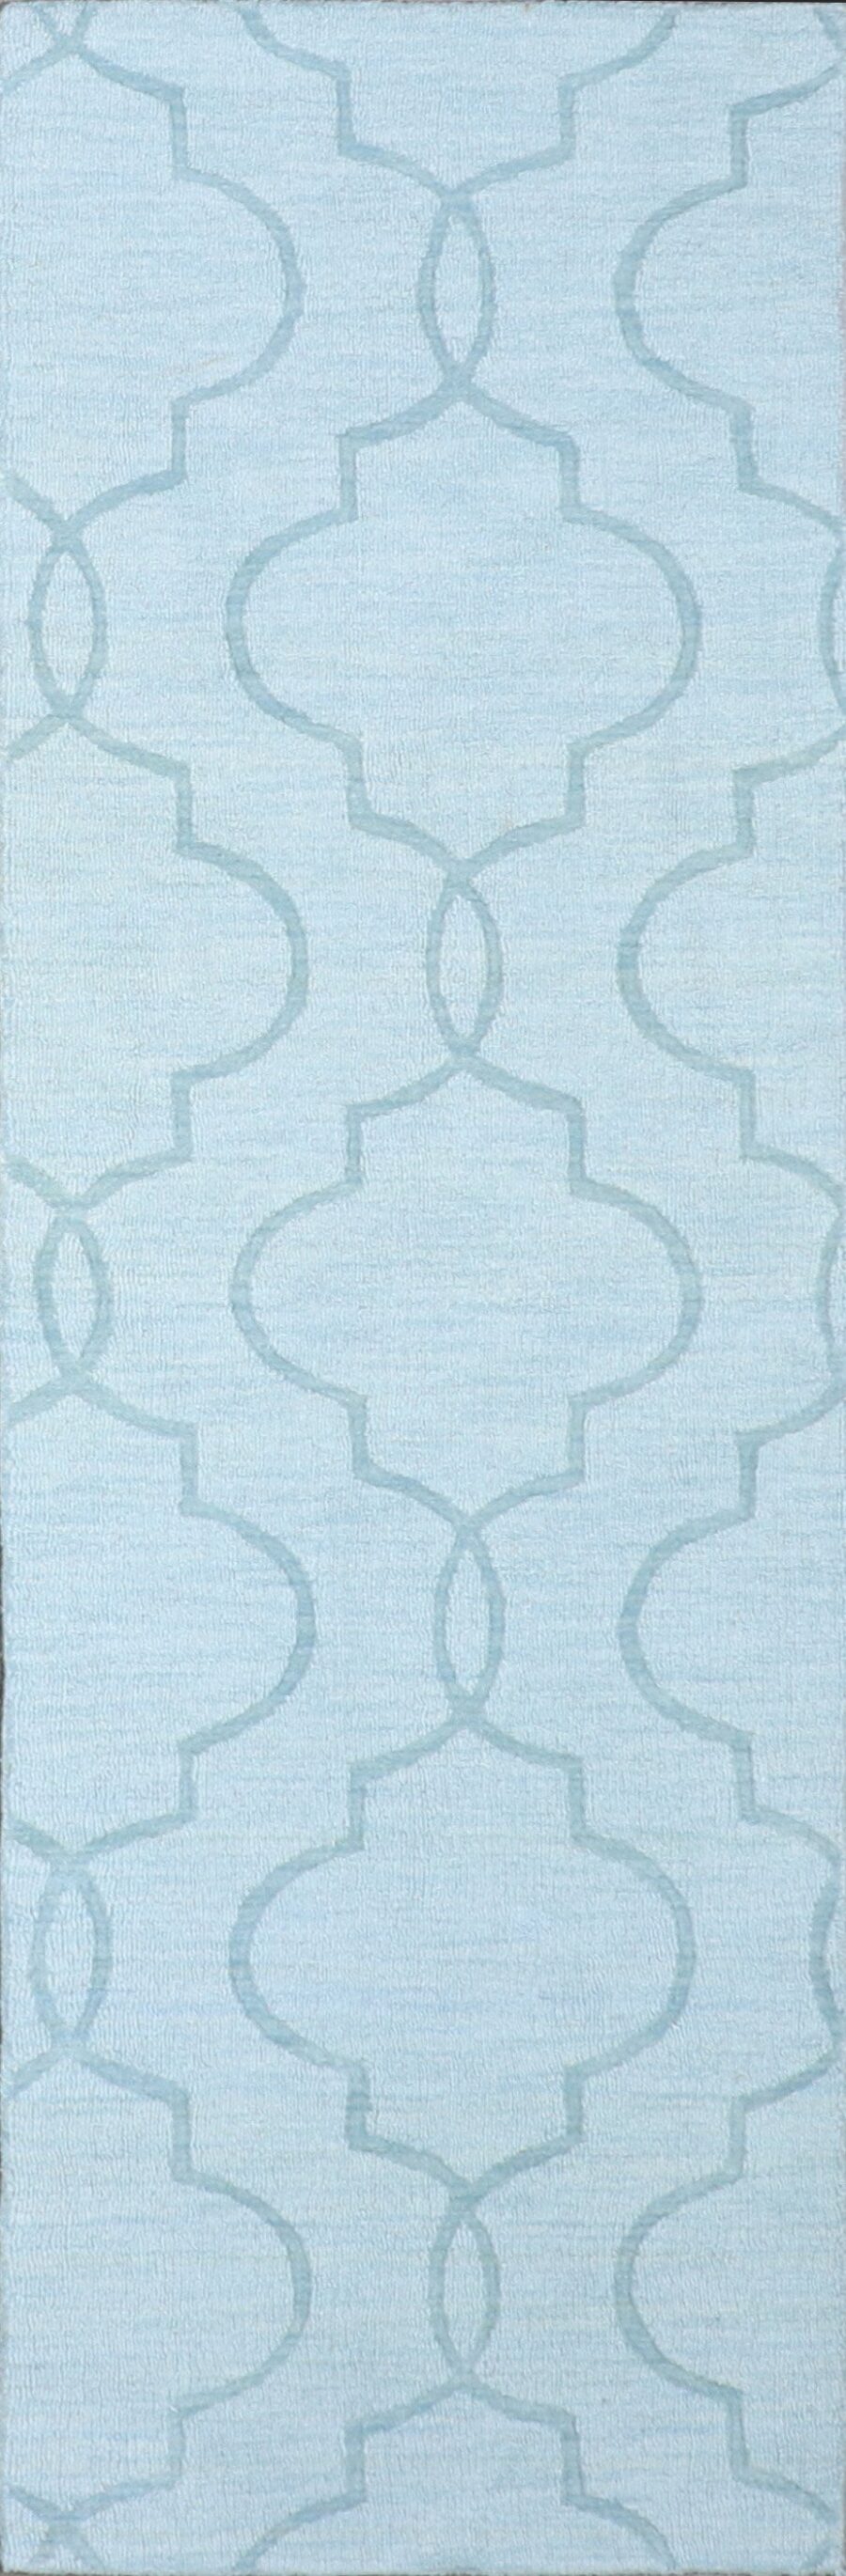 2'6"x7'11" Contemporary Wool Hand-Tufted Rug - Direct Rug Import | Rugs in Chicago, Indiana,South Bend,Granger